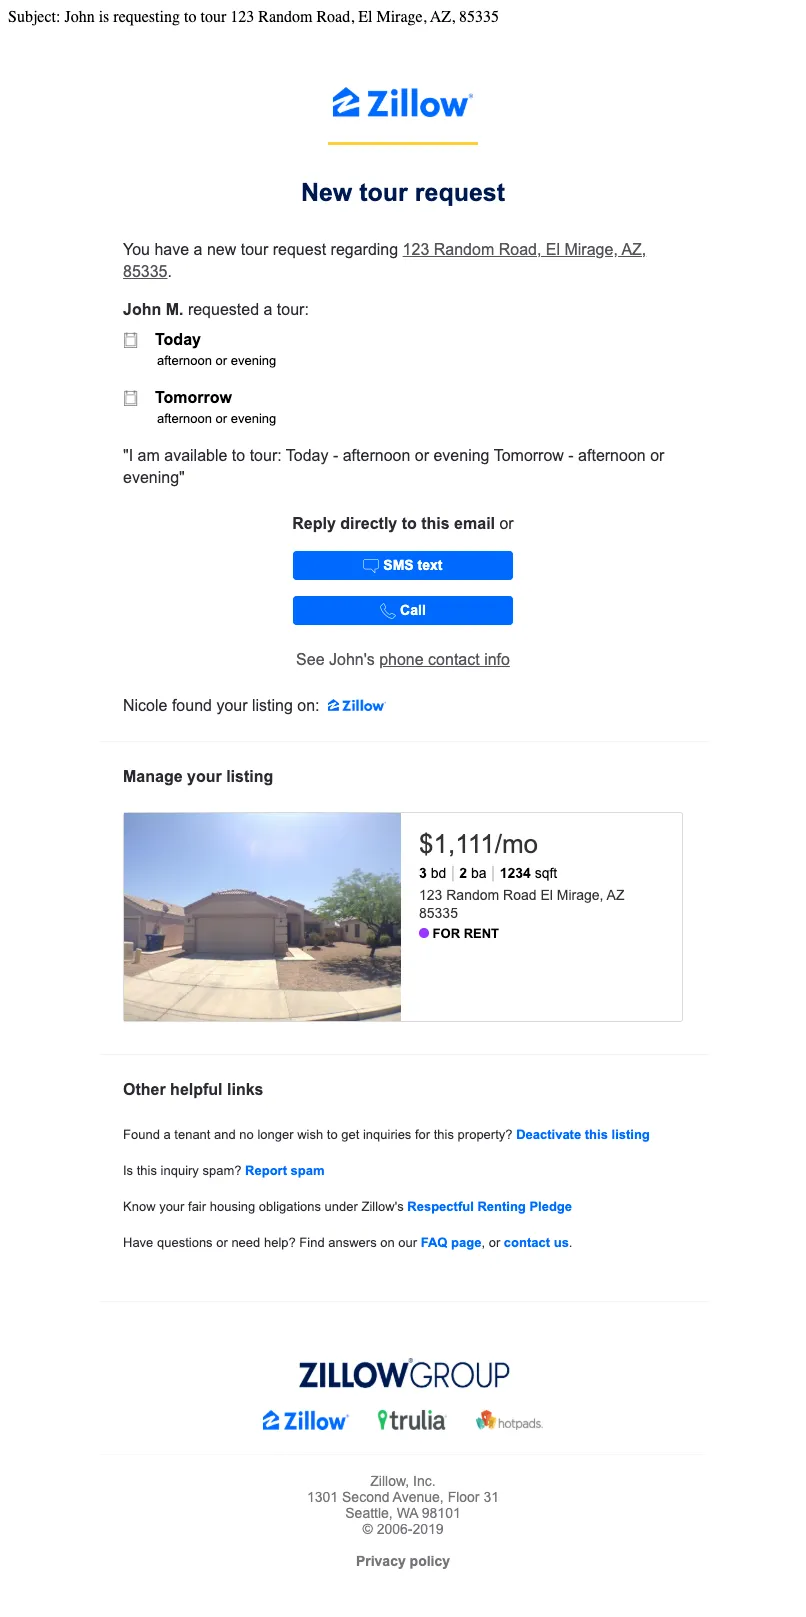 A screen capture of Zillow Tour Request email sample